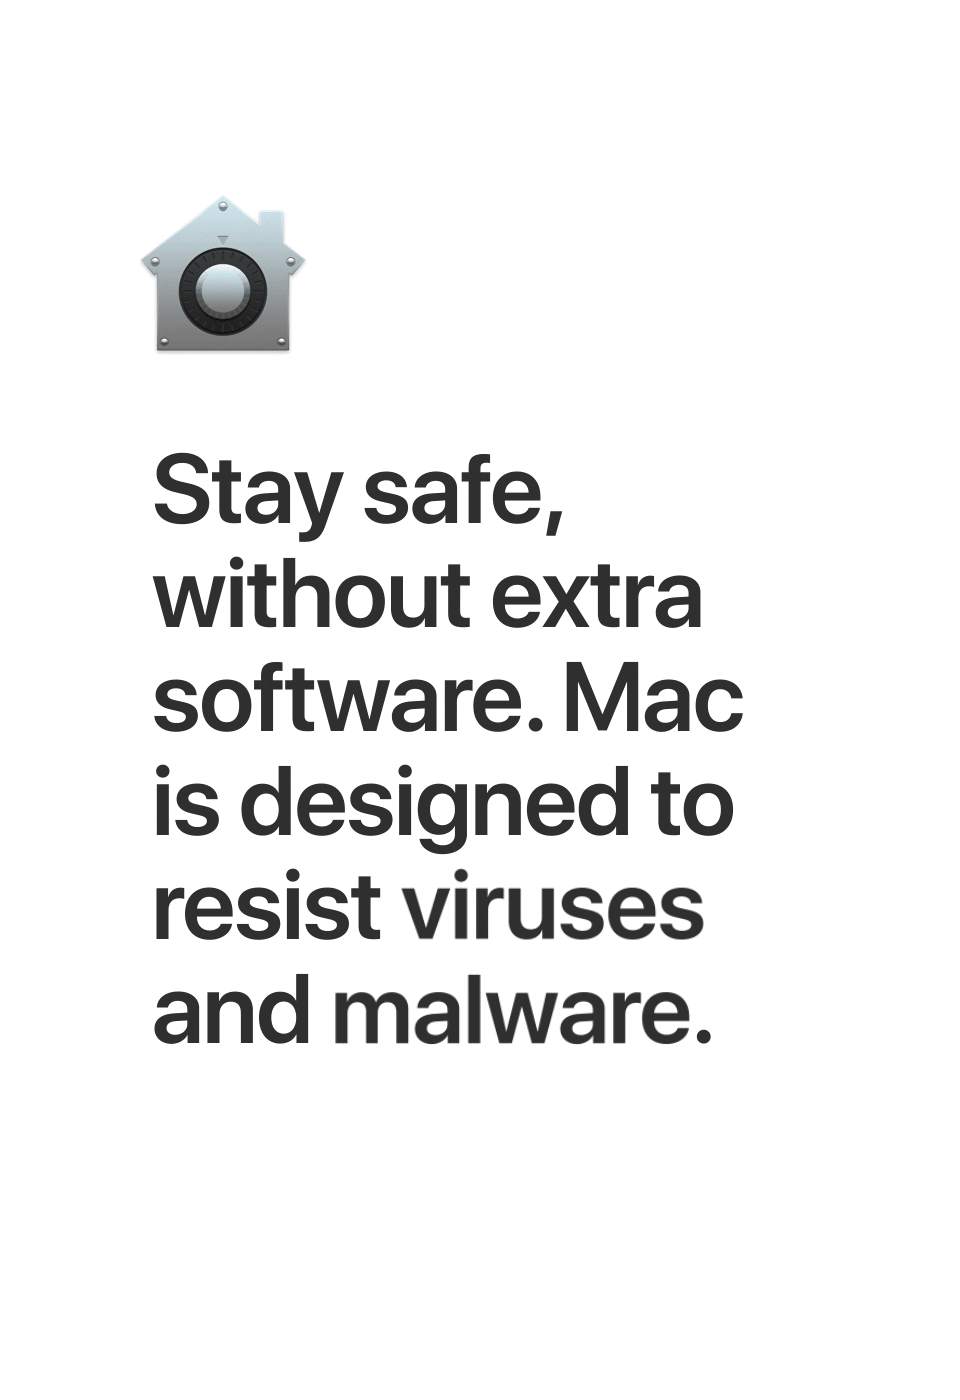 Stay safe, without extra software. Mac is designed to resist viruses and malware.